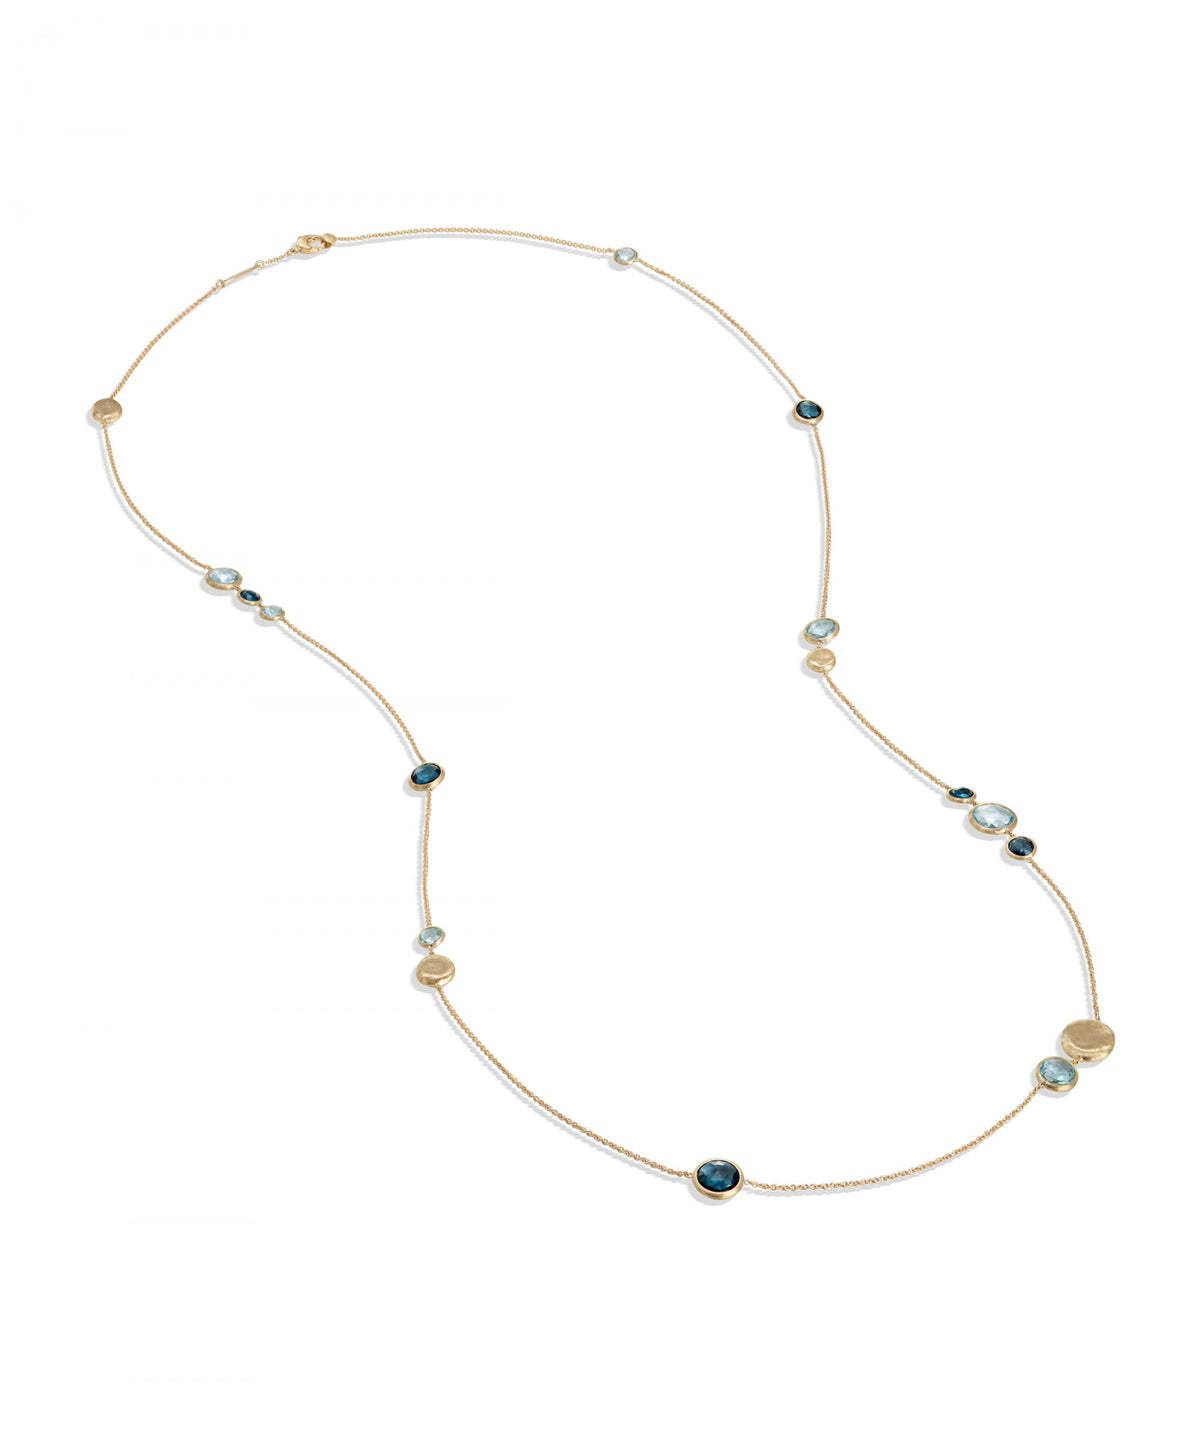 Jaipur Colour Necklace in 18k Yellow Gold with Gemstones Mixed Blue Long - Orsini Jewellers NZ